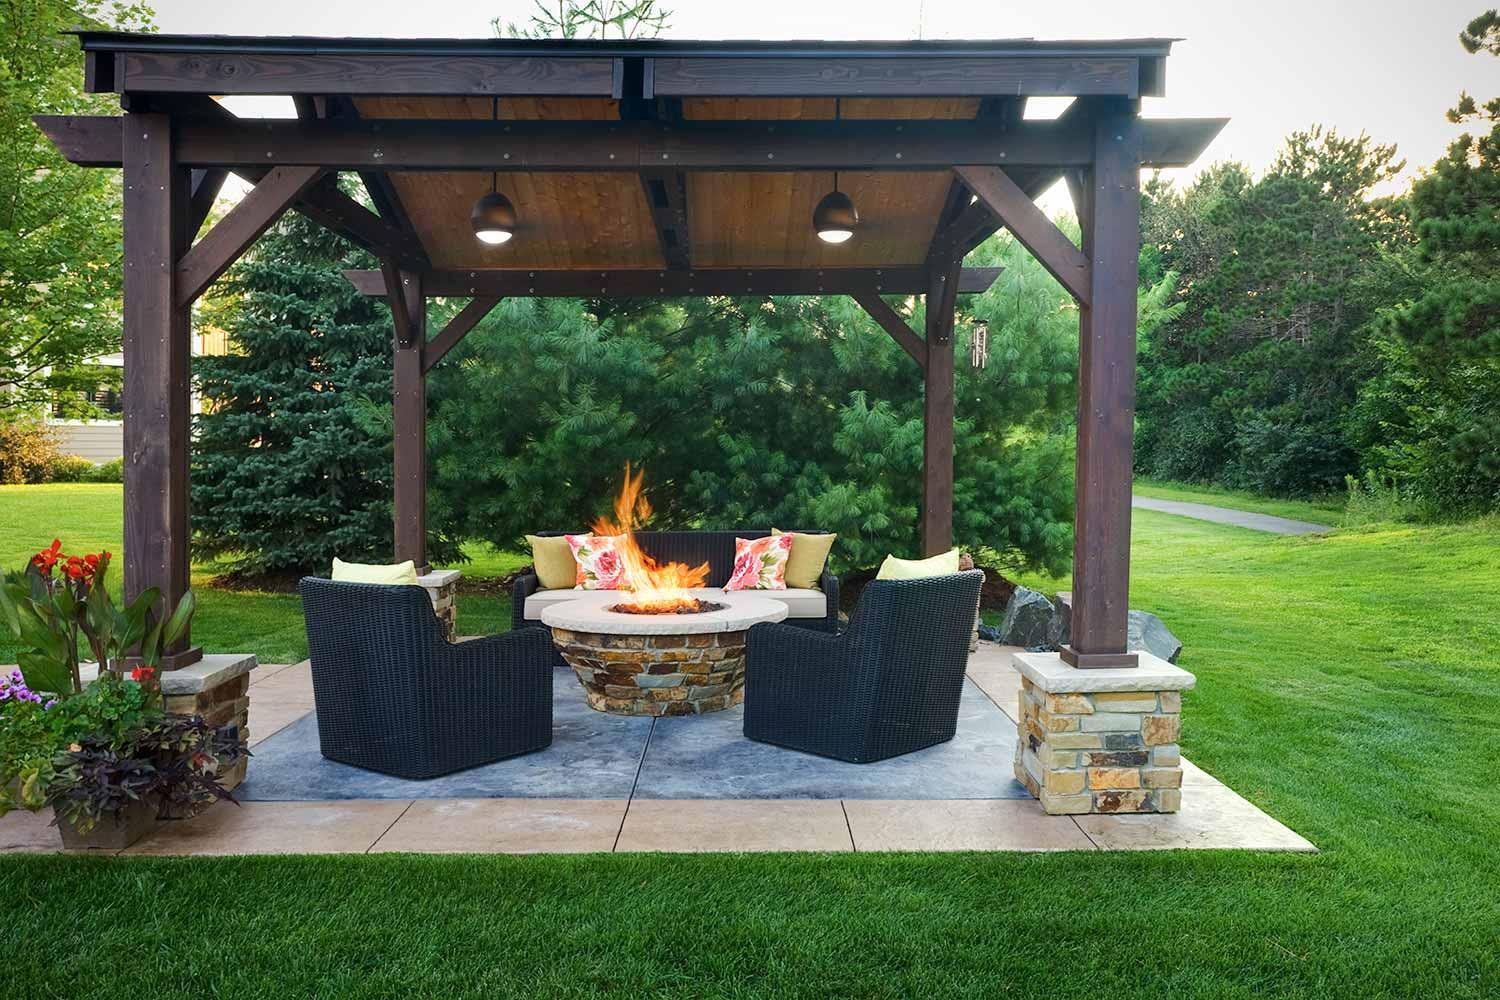 Stone Paver Fire Pits Fireplaces And, Fire Pit Shelter